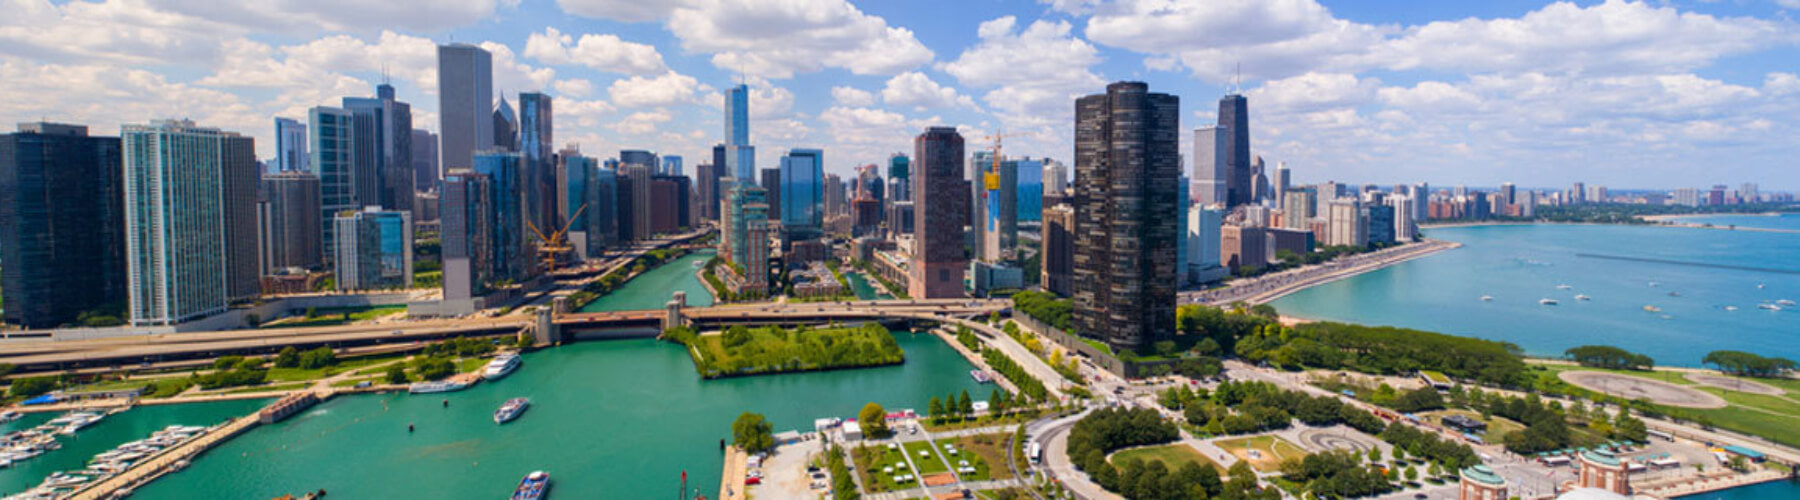 Aerial view of the Chicago skyline